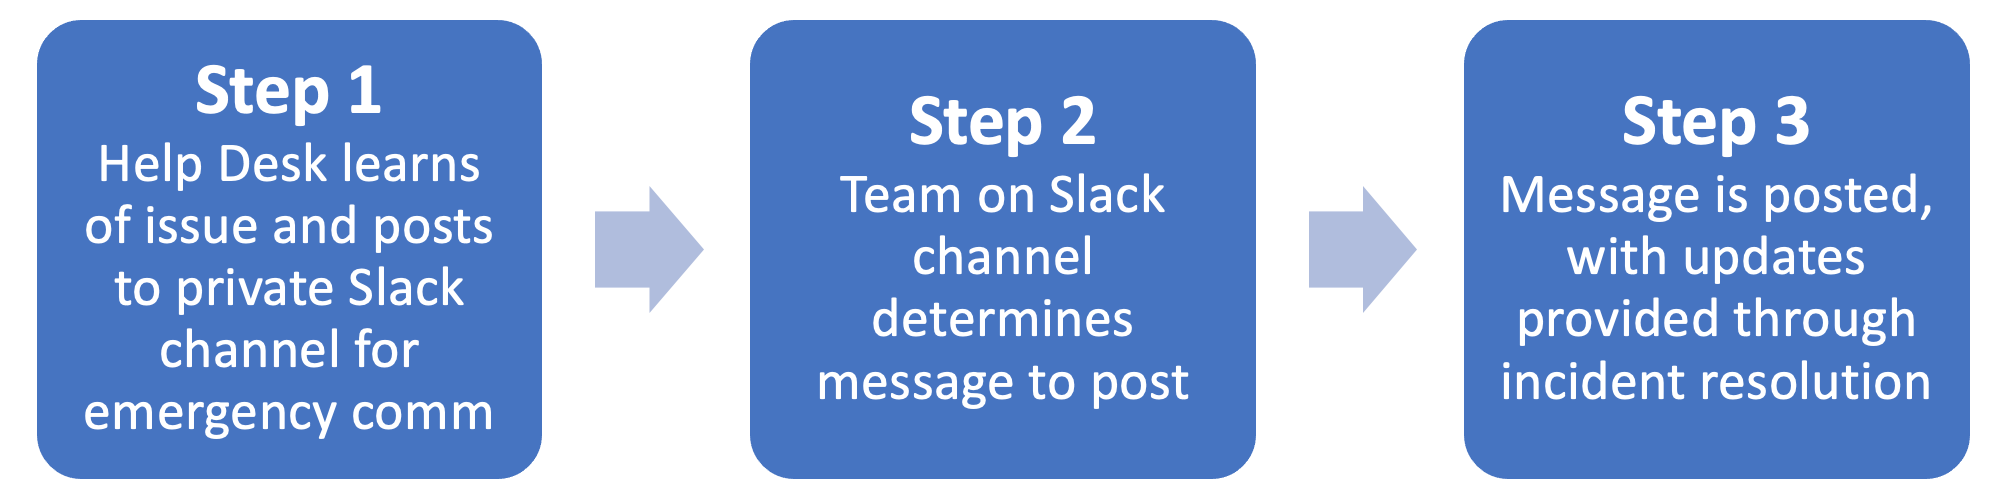 Step 1: Help Desk learns of issue and posts to private Slack channel for emergency comm. Step 2: Team on Slack channel determines message to post. Step 3: Message is posted, with updates provided through incident resolution.